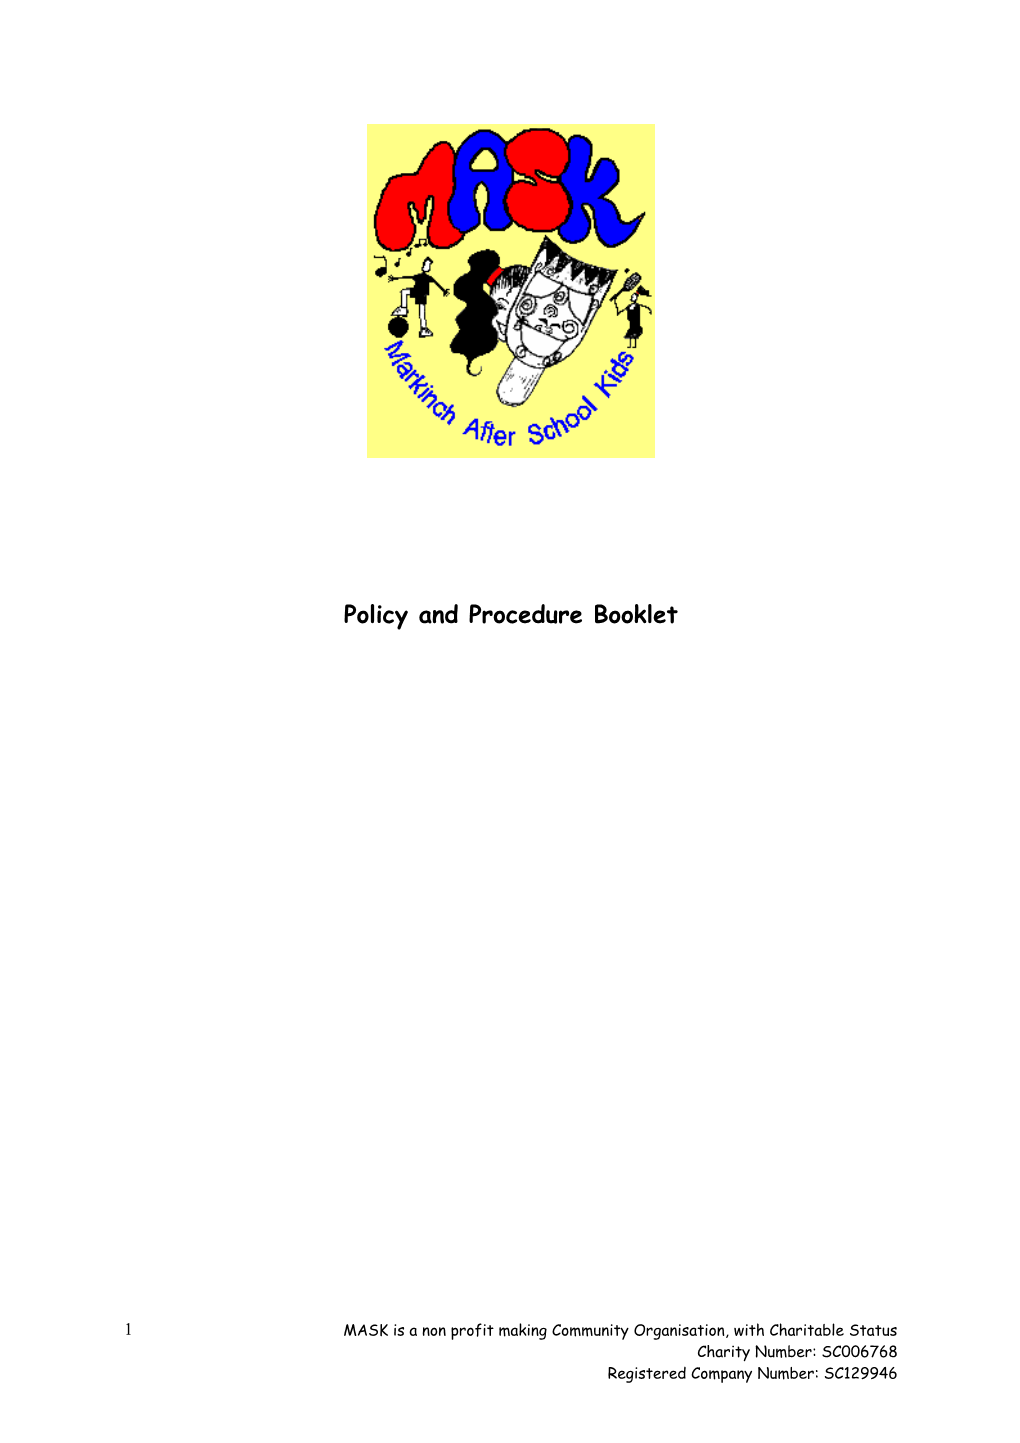 Policy and Procedure Booklet